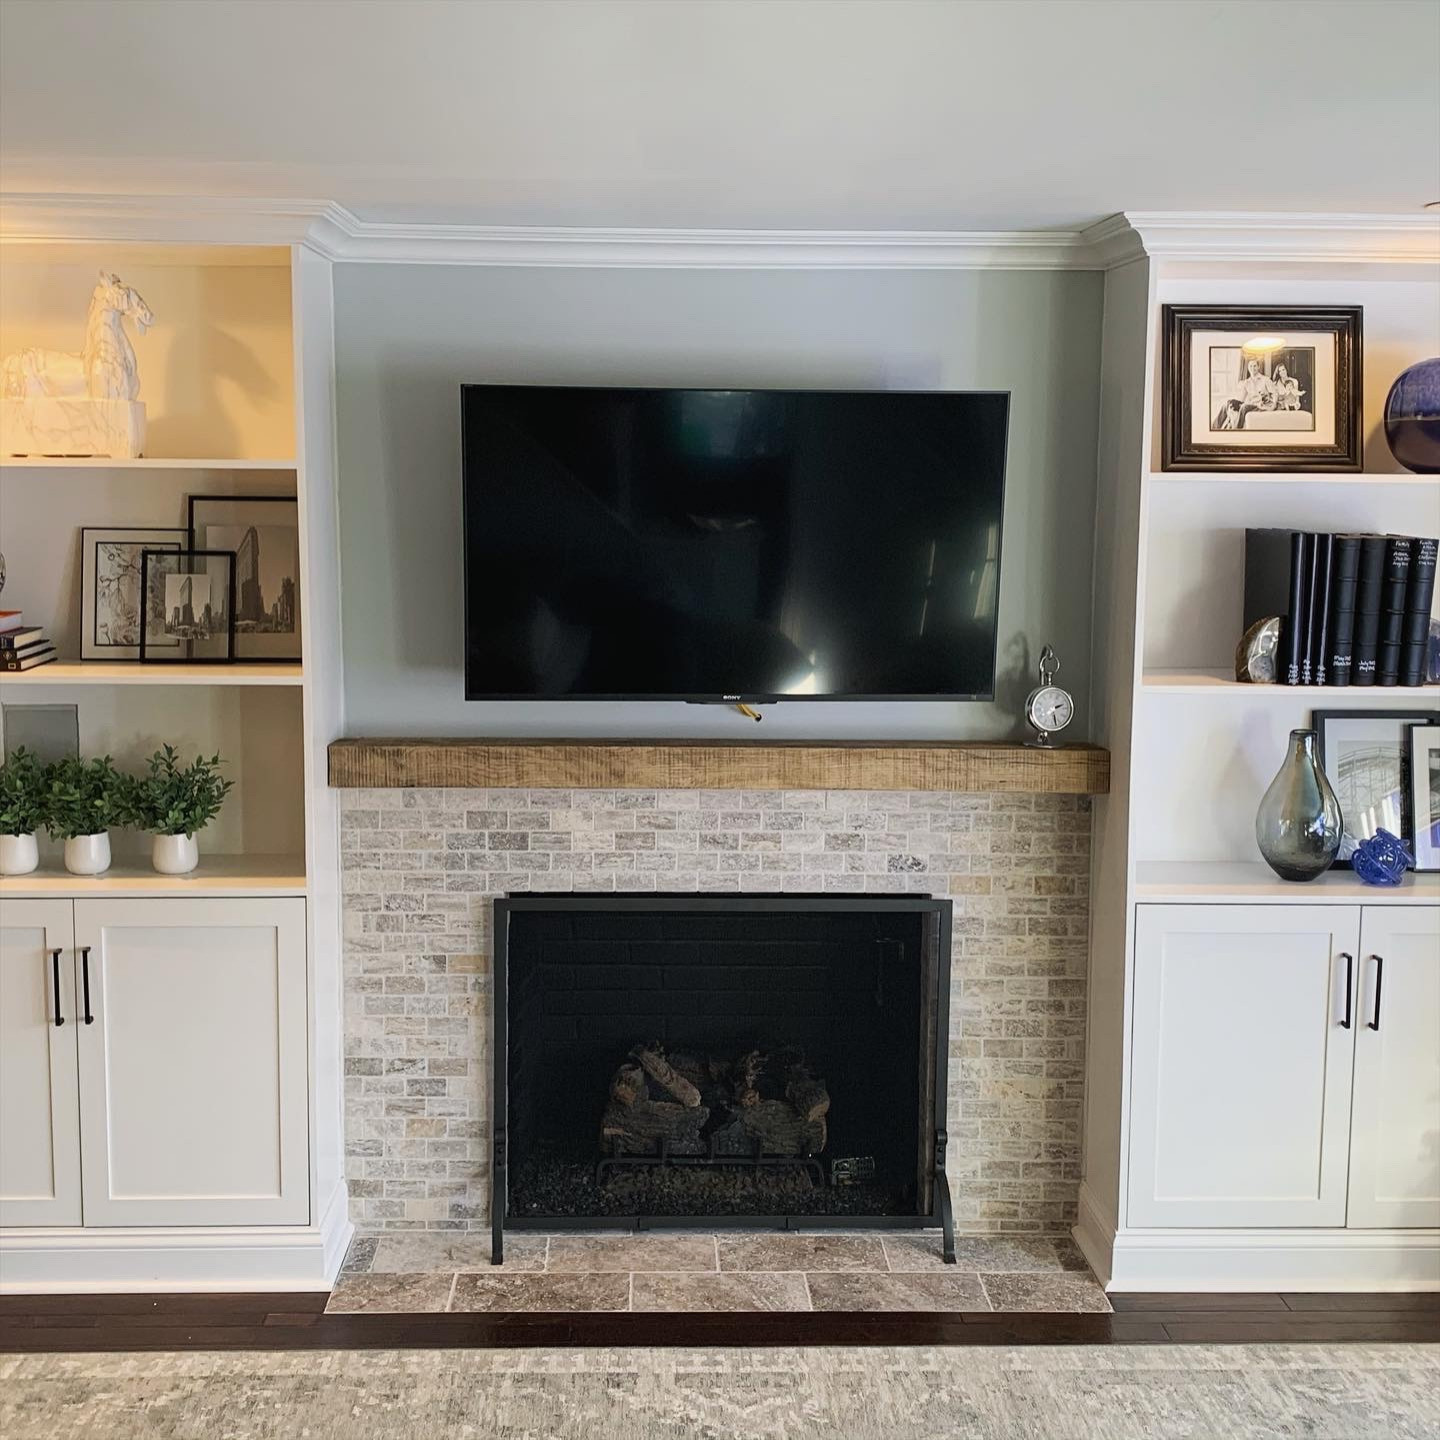 Custom built in bookcase/fireplace and hearth area